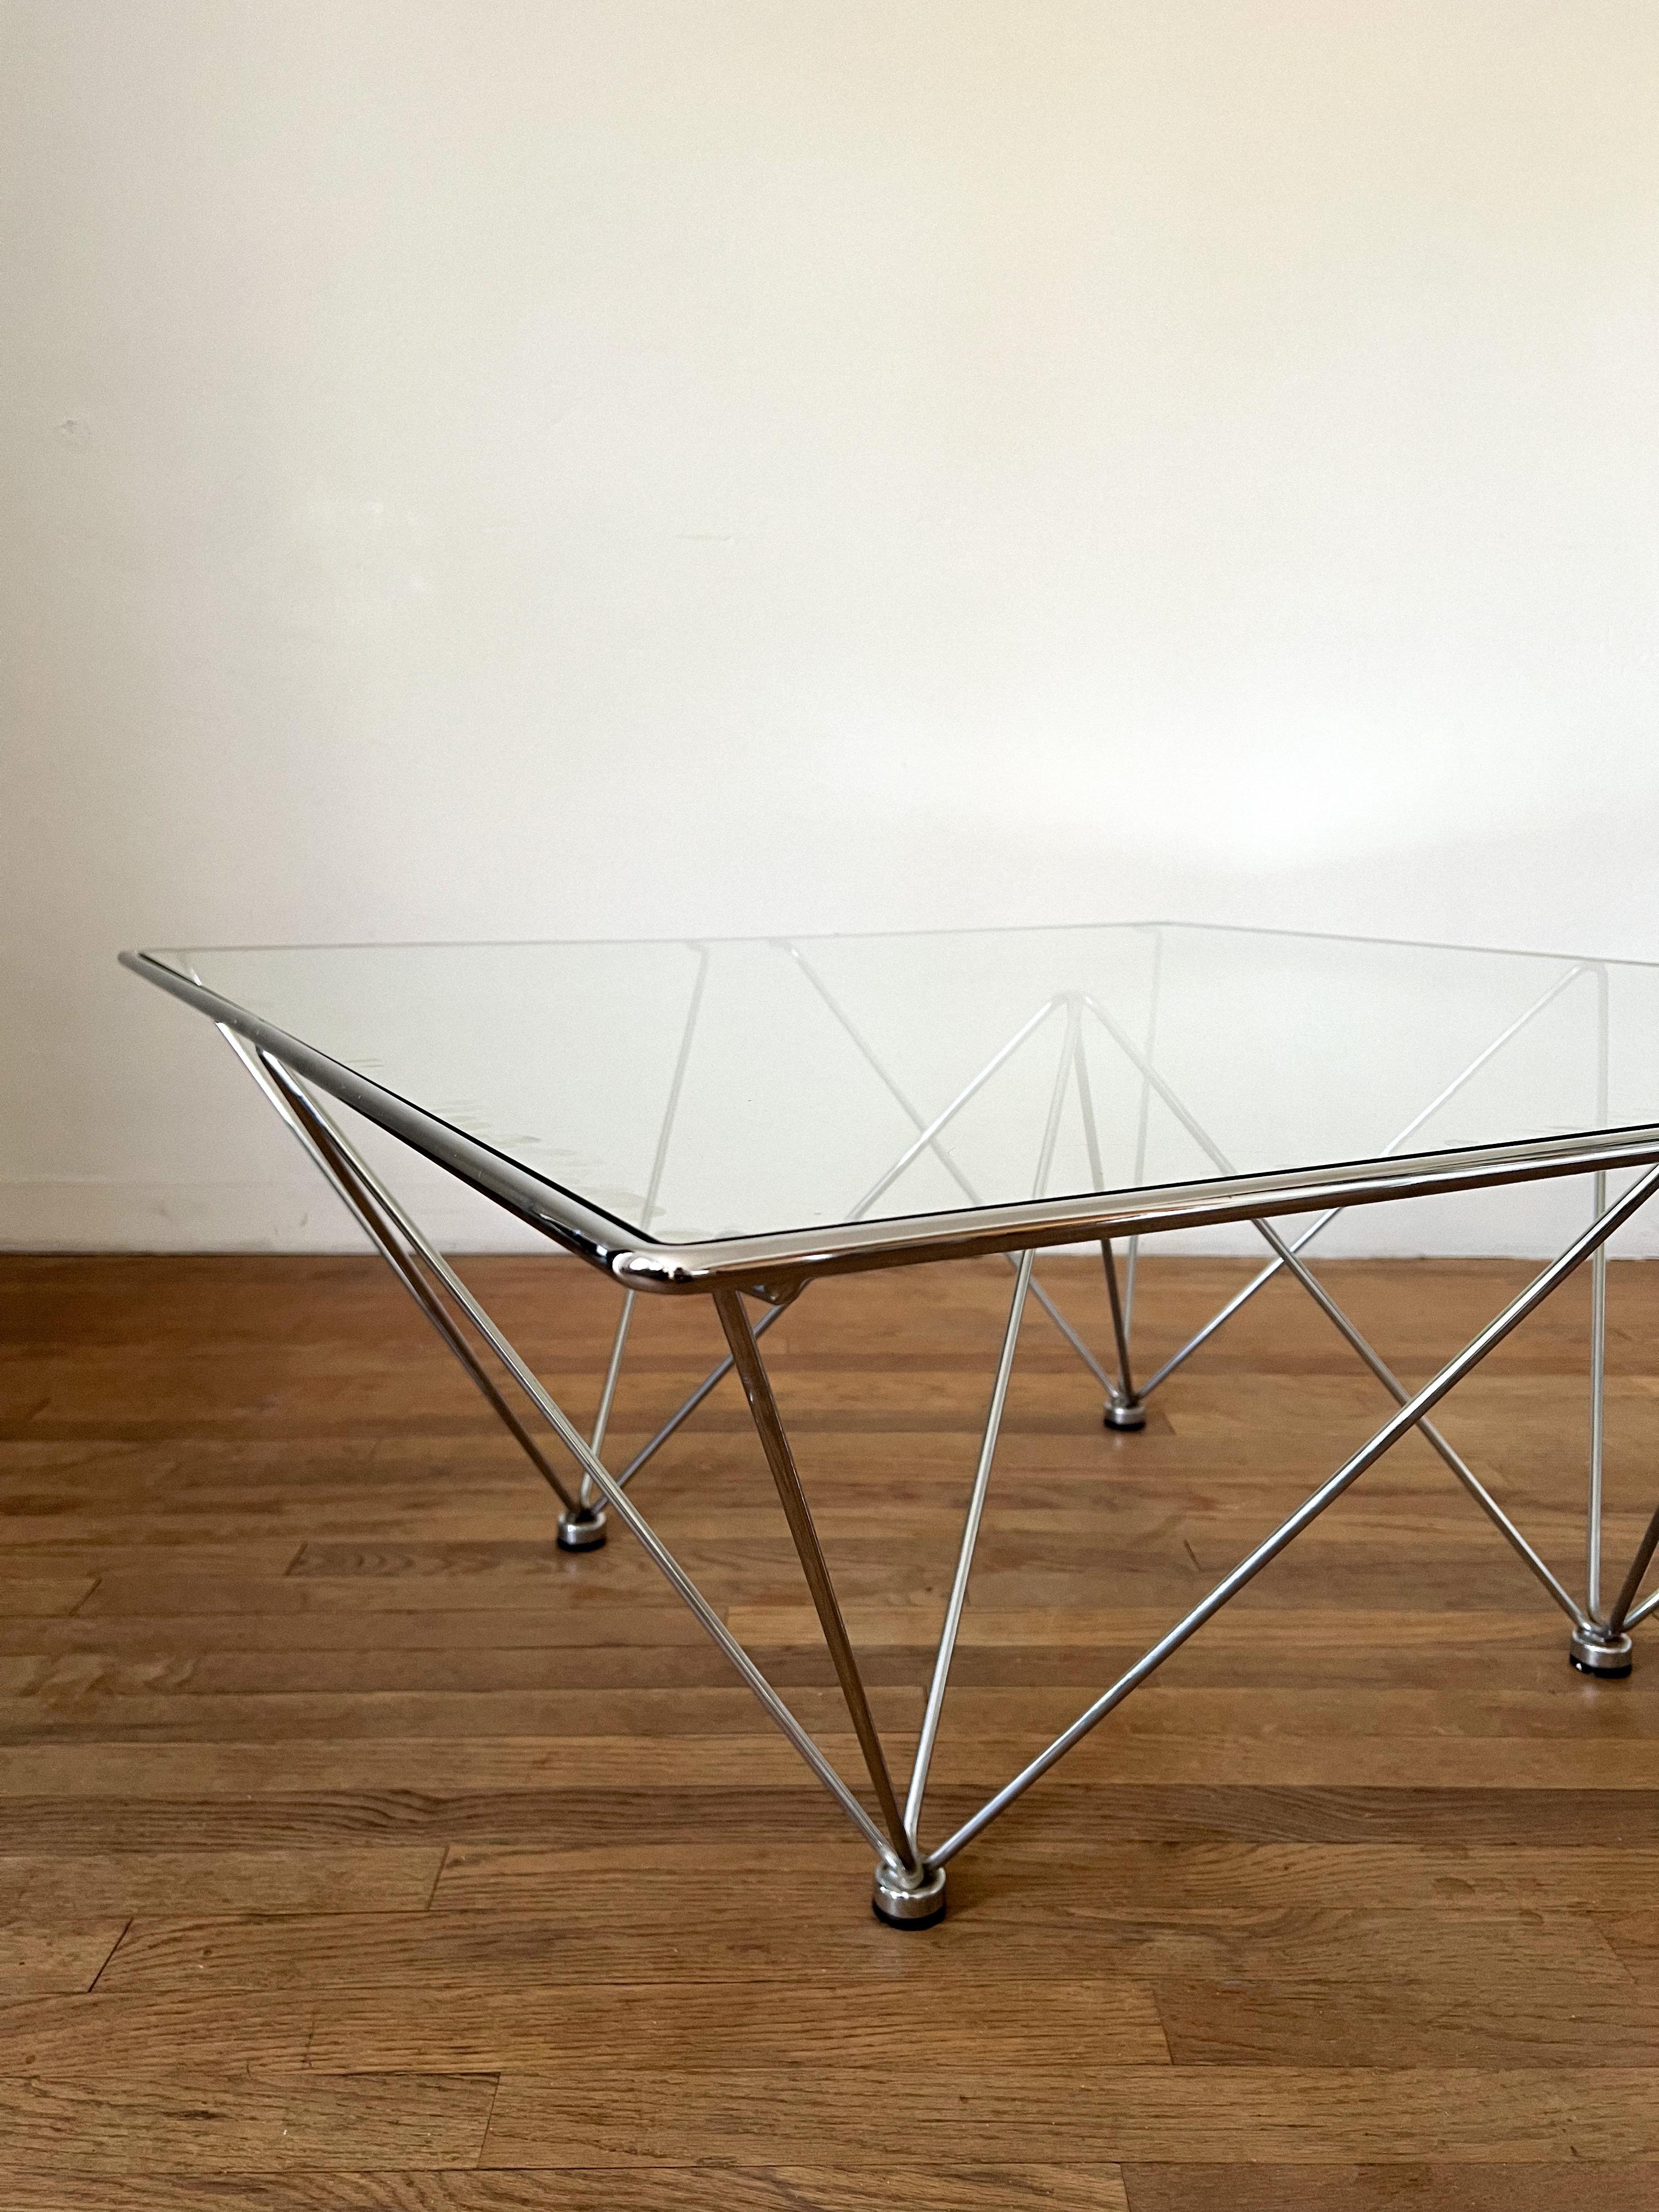 Post-Modern 1980s Sculptural “Alanda” Coffee Table in the Style of Paolo Piva for B&b Italia For Sale